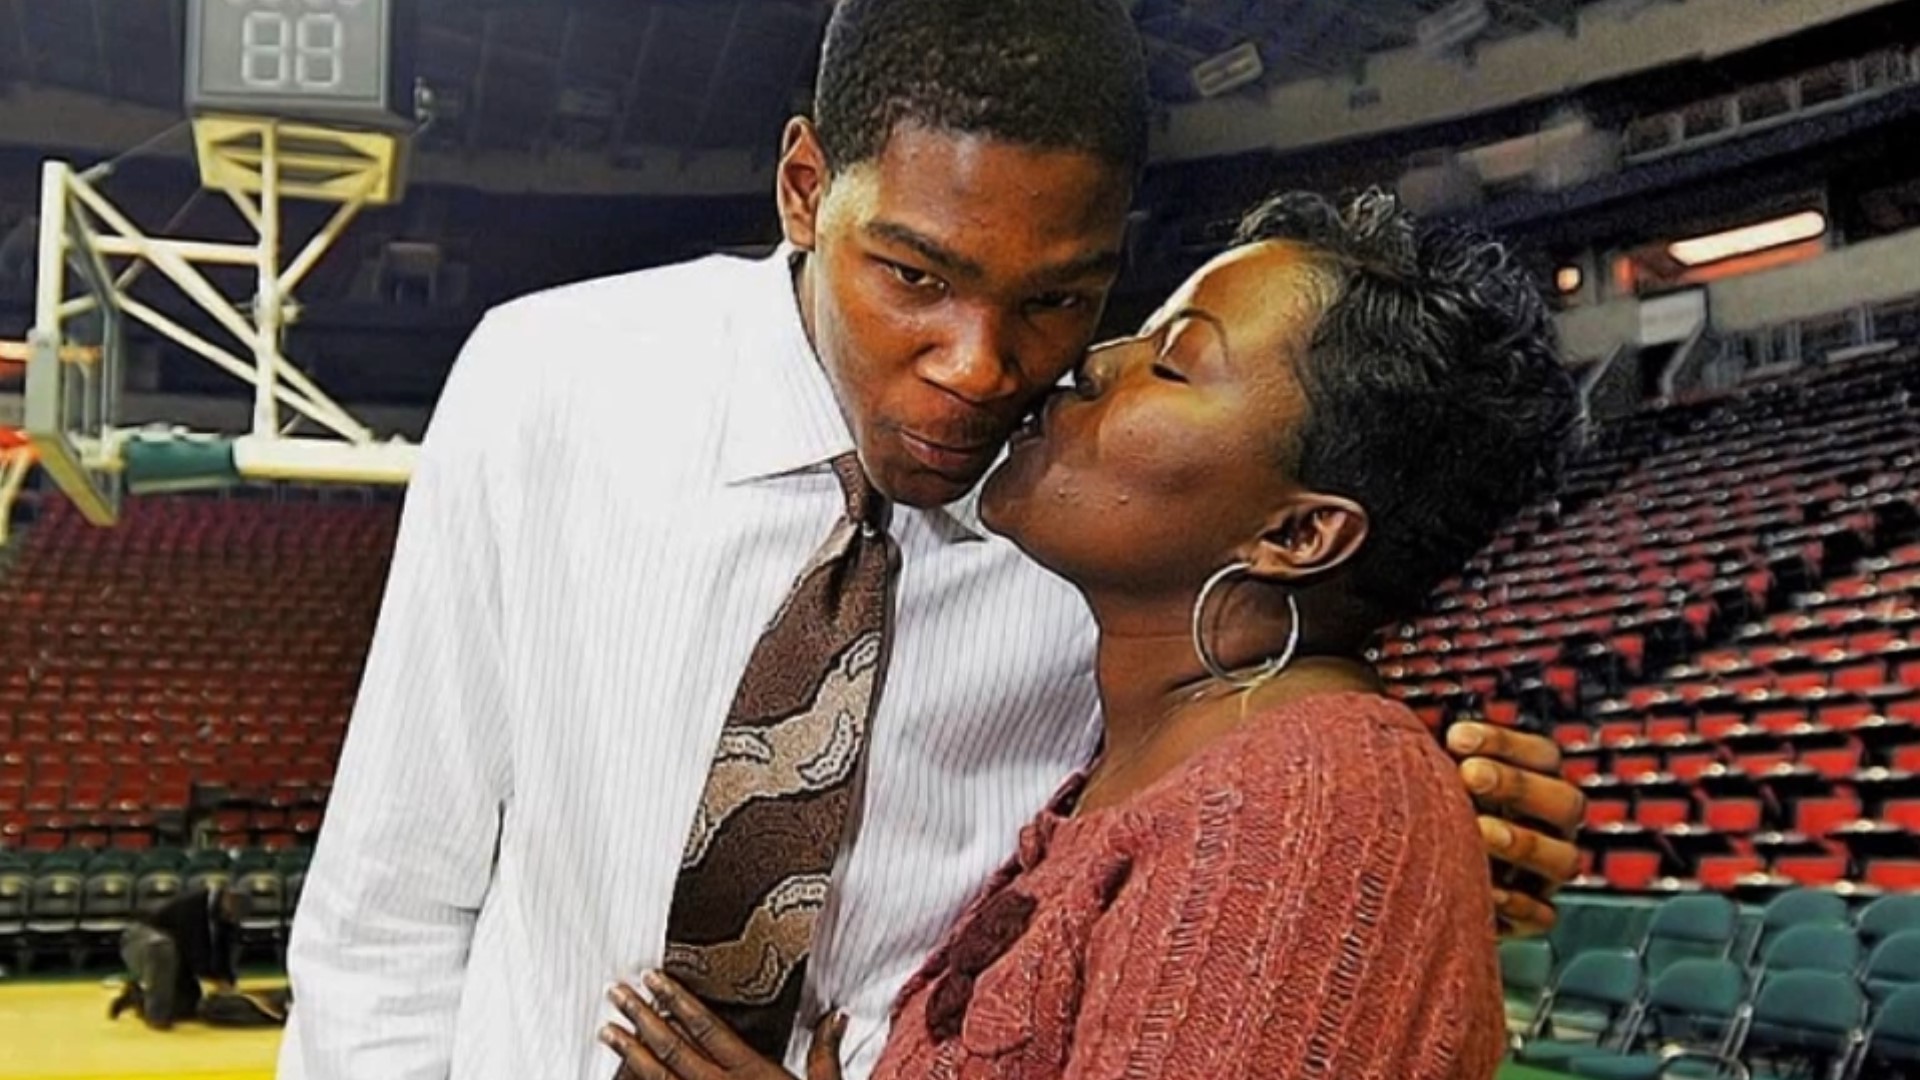 Through thick and thin, Mama Durant has been a consistent coach and fan of her son, Kevin Durant.